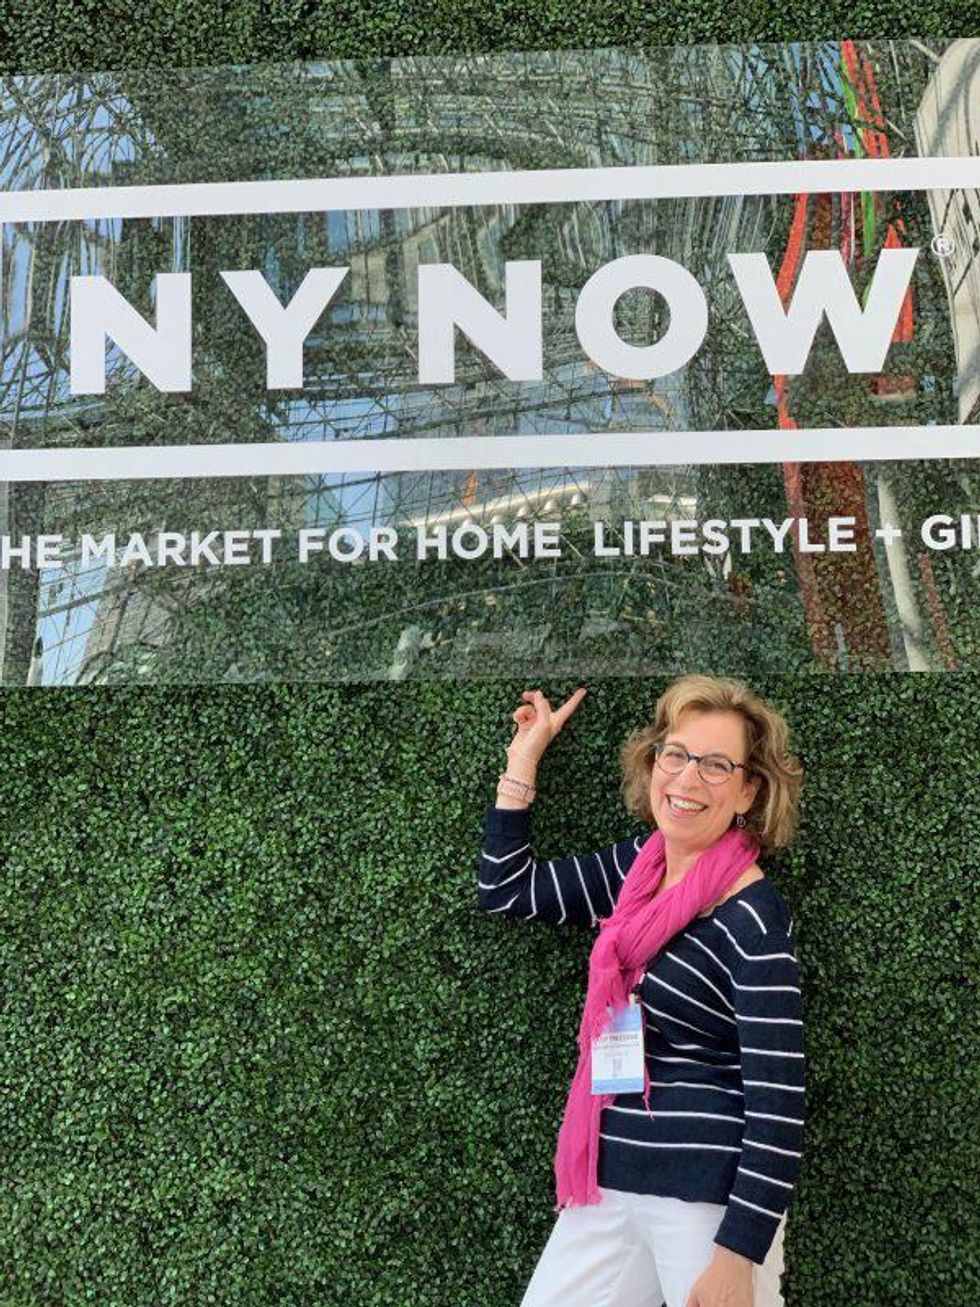 I attended the Summer 2019 NY NOW Market to search for ideas for my holiday gift guide.